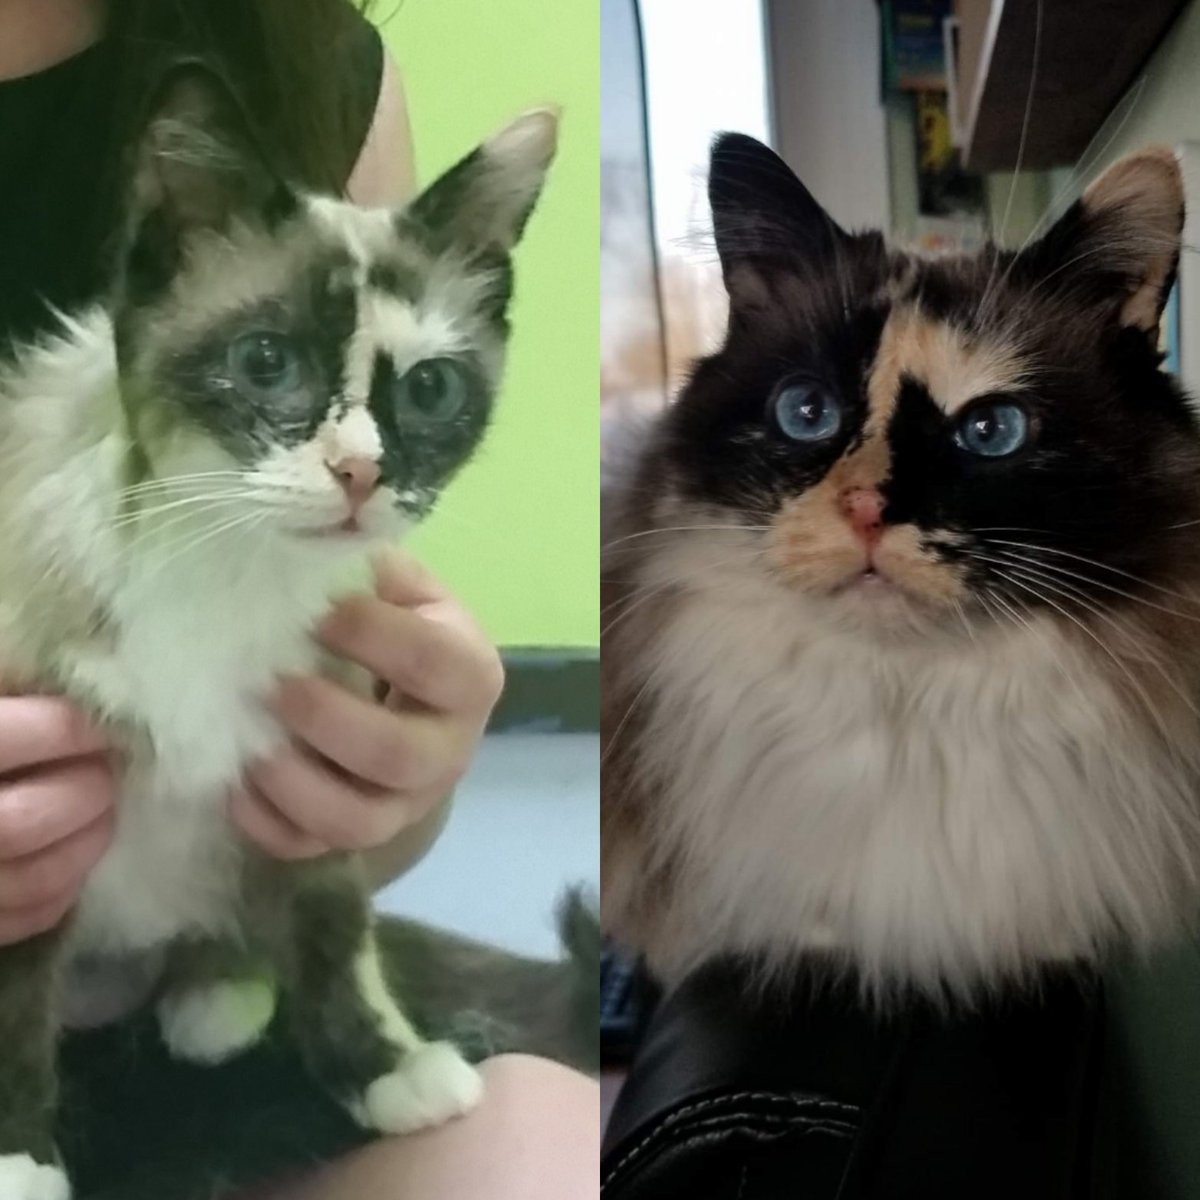 (L) is Queen the first day I met her. I slept in the bathroom with her for 3 days, she was so scared. (R) current day. This is my ask to adopt moms, older animals, different looking animals or special needs animals. They need us just as much as Larry needed me.